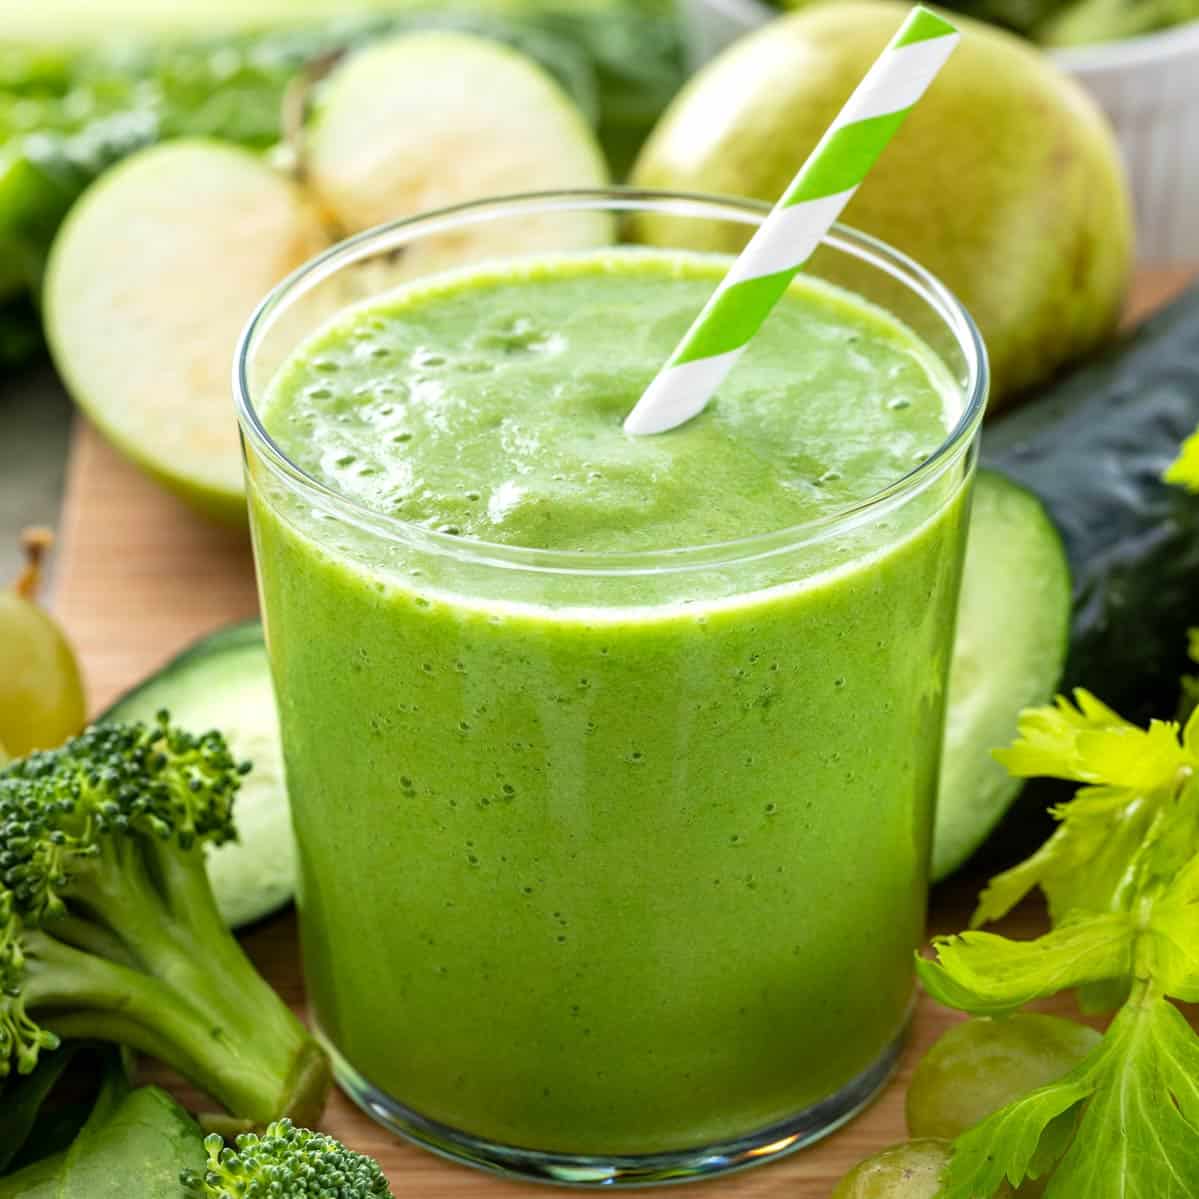 Green Smoothies: Are They Good for You?